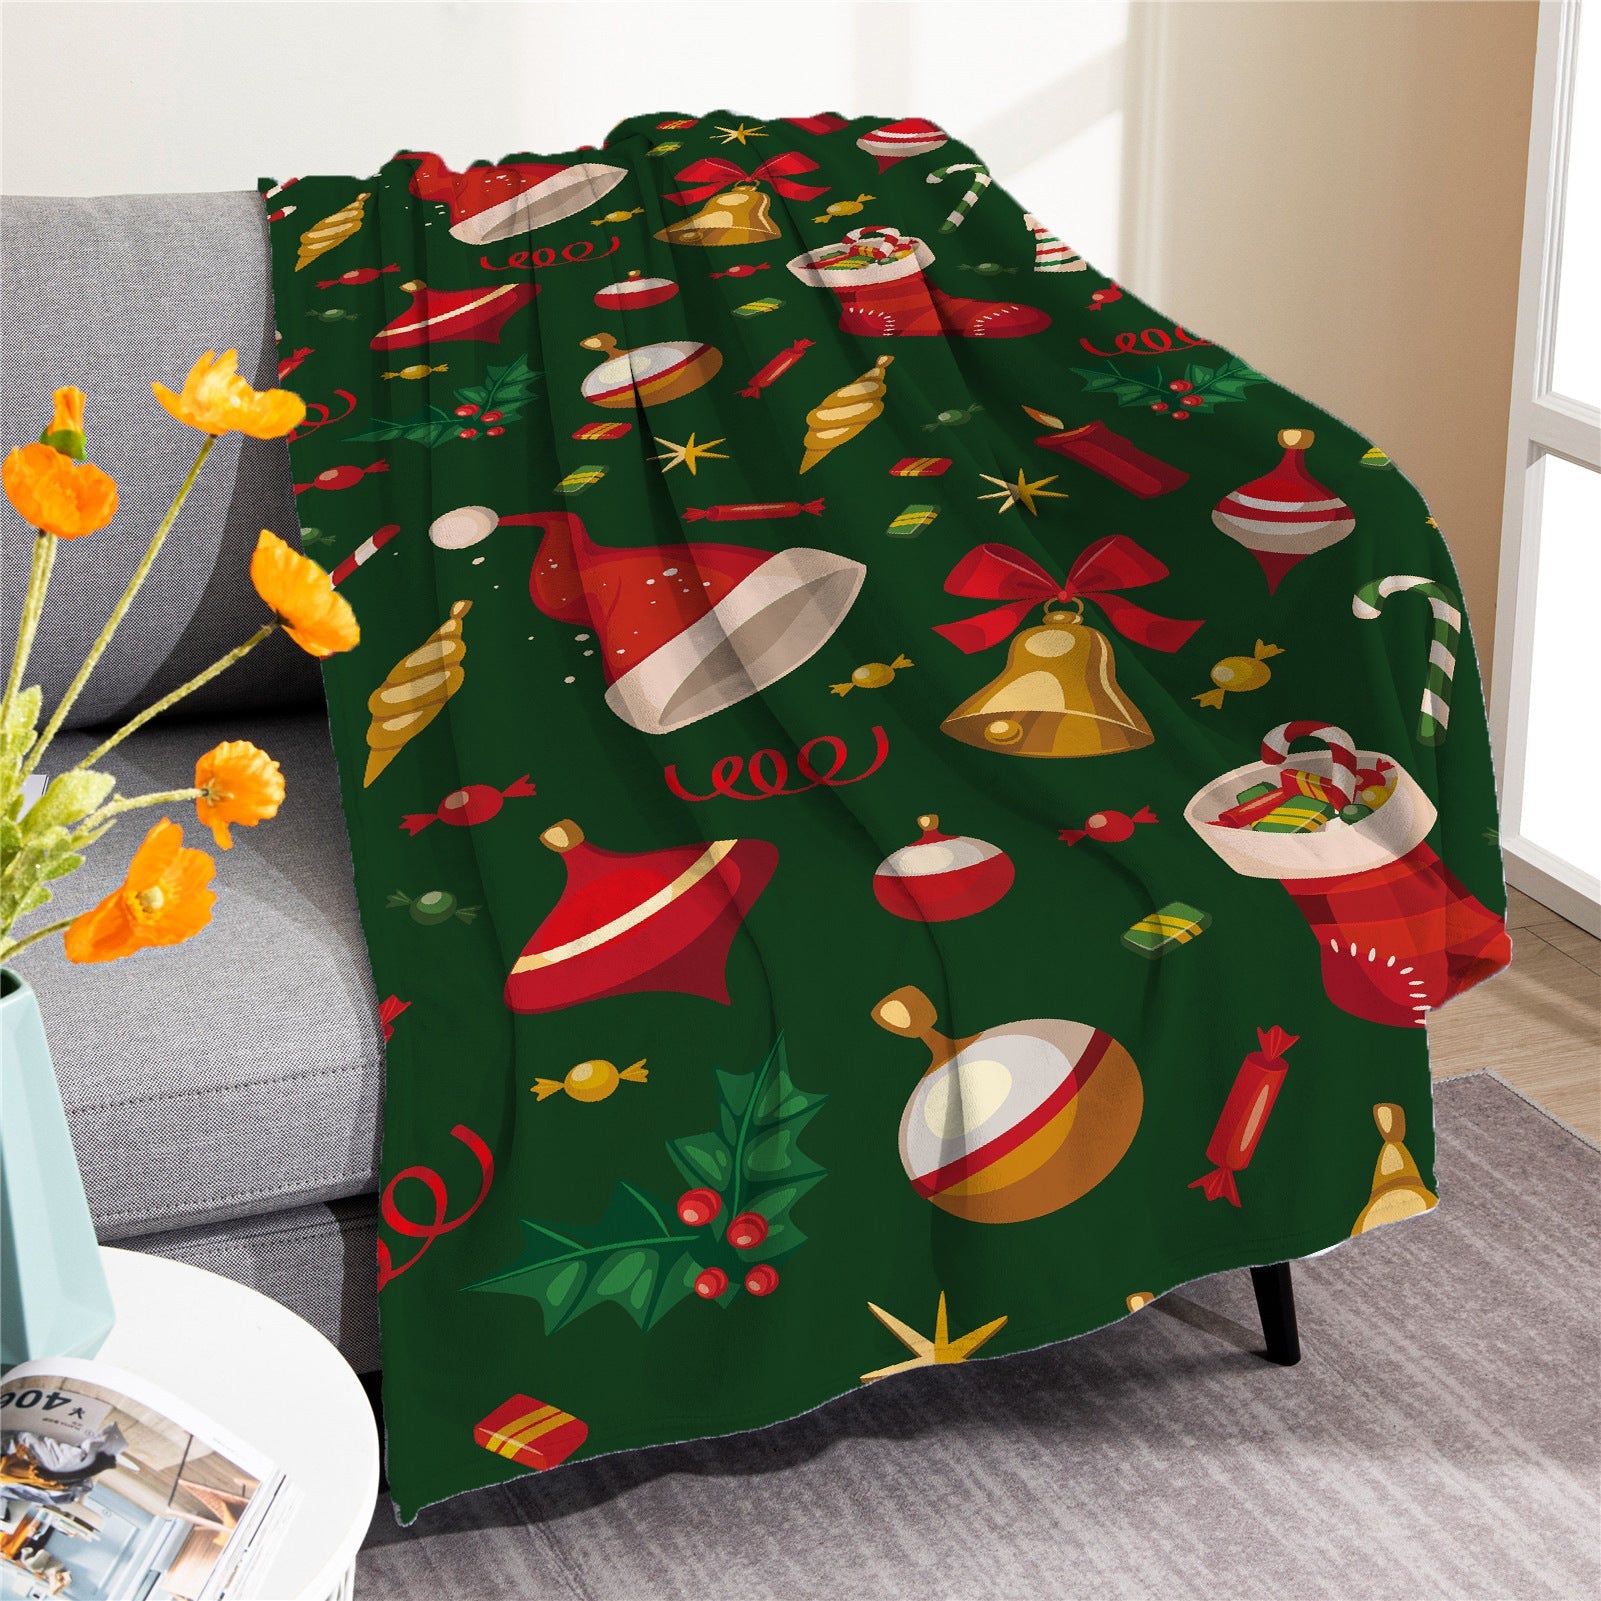 Merry Christmas Soft Fleece Throw Blankets-Blankets-M20220916-6-50*60 inches-Free Shipping at meselling99